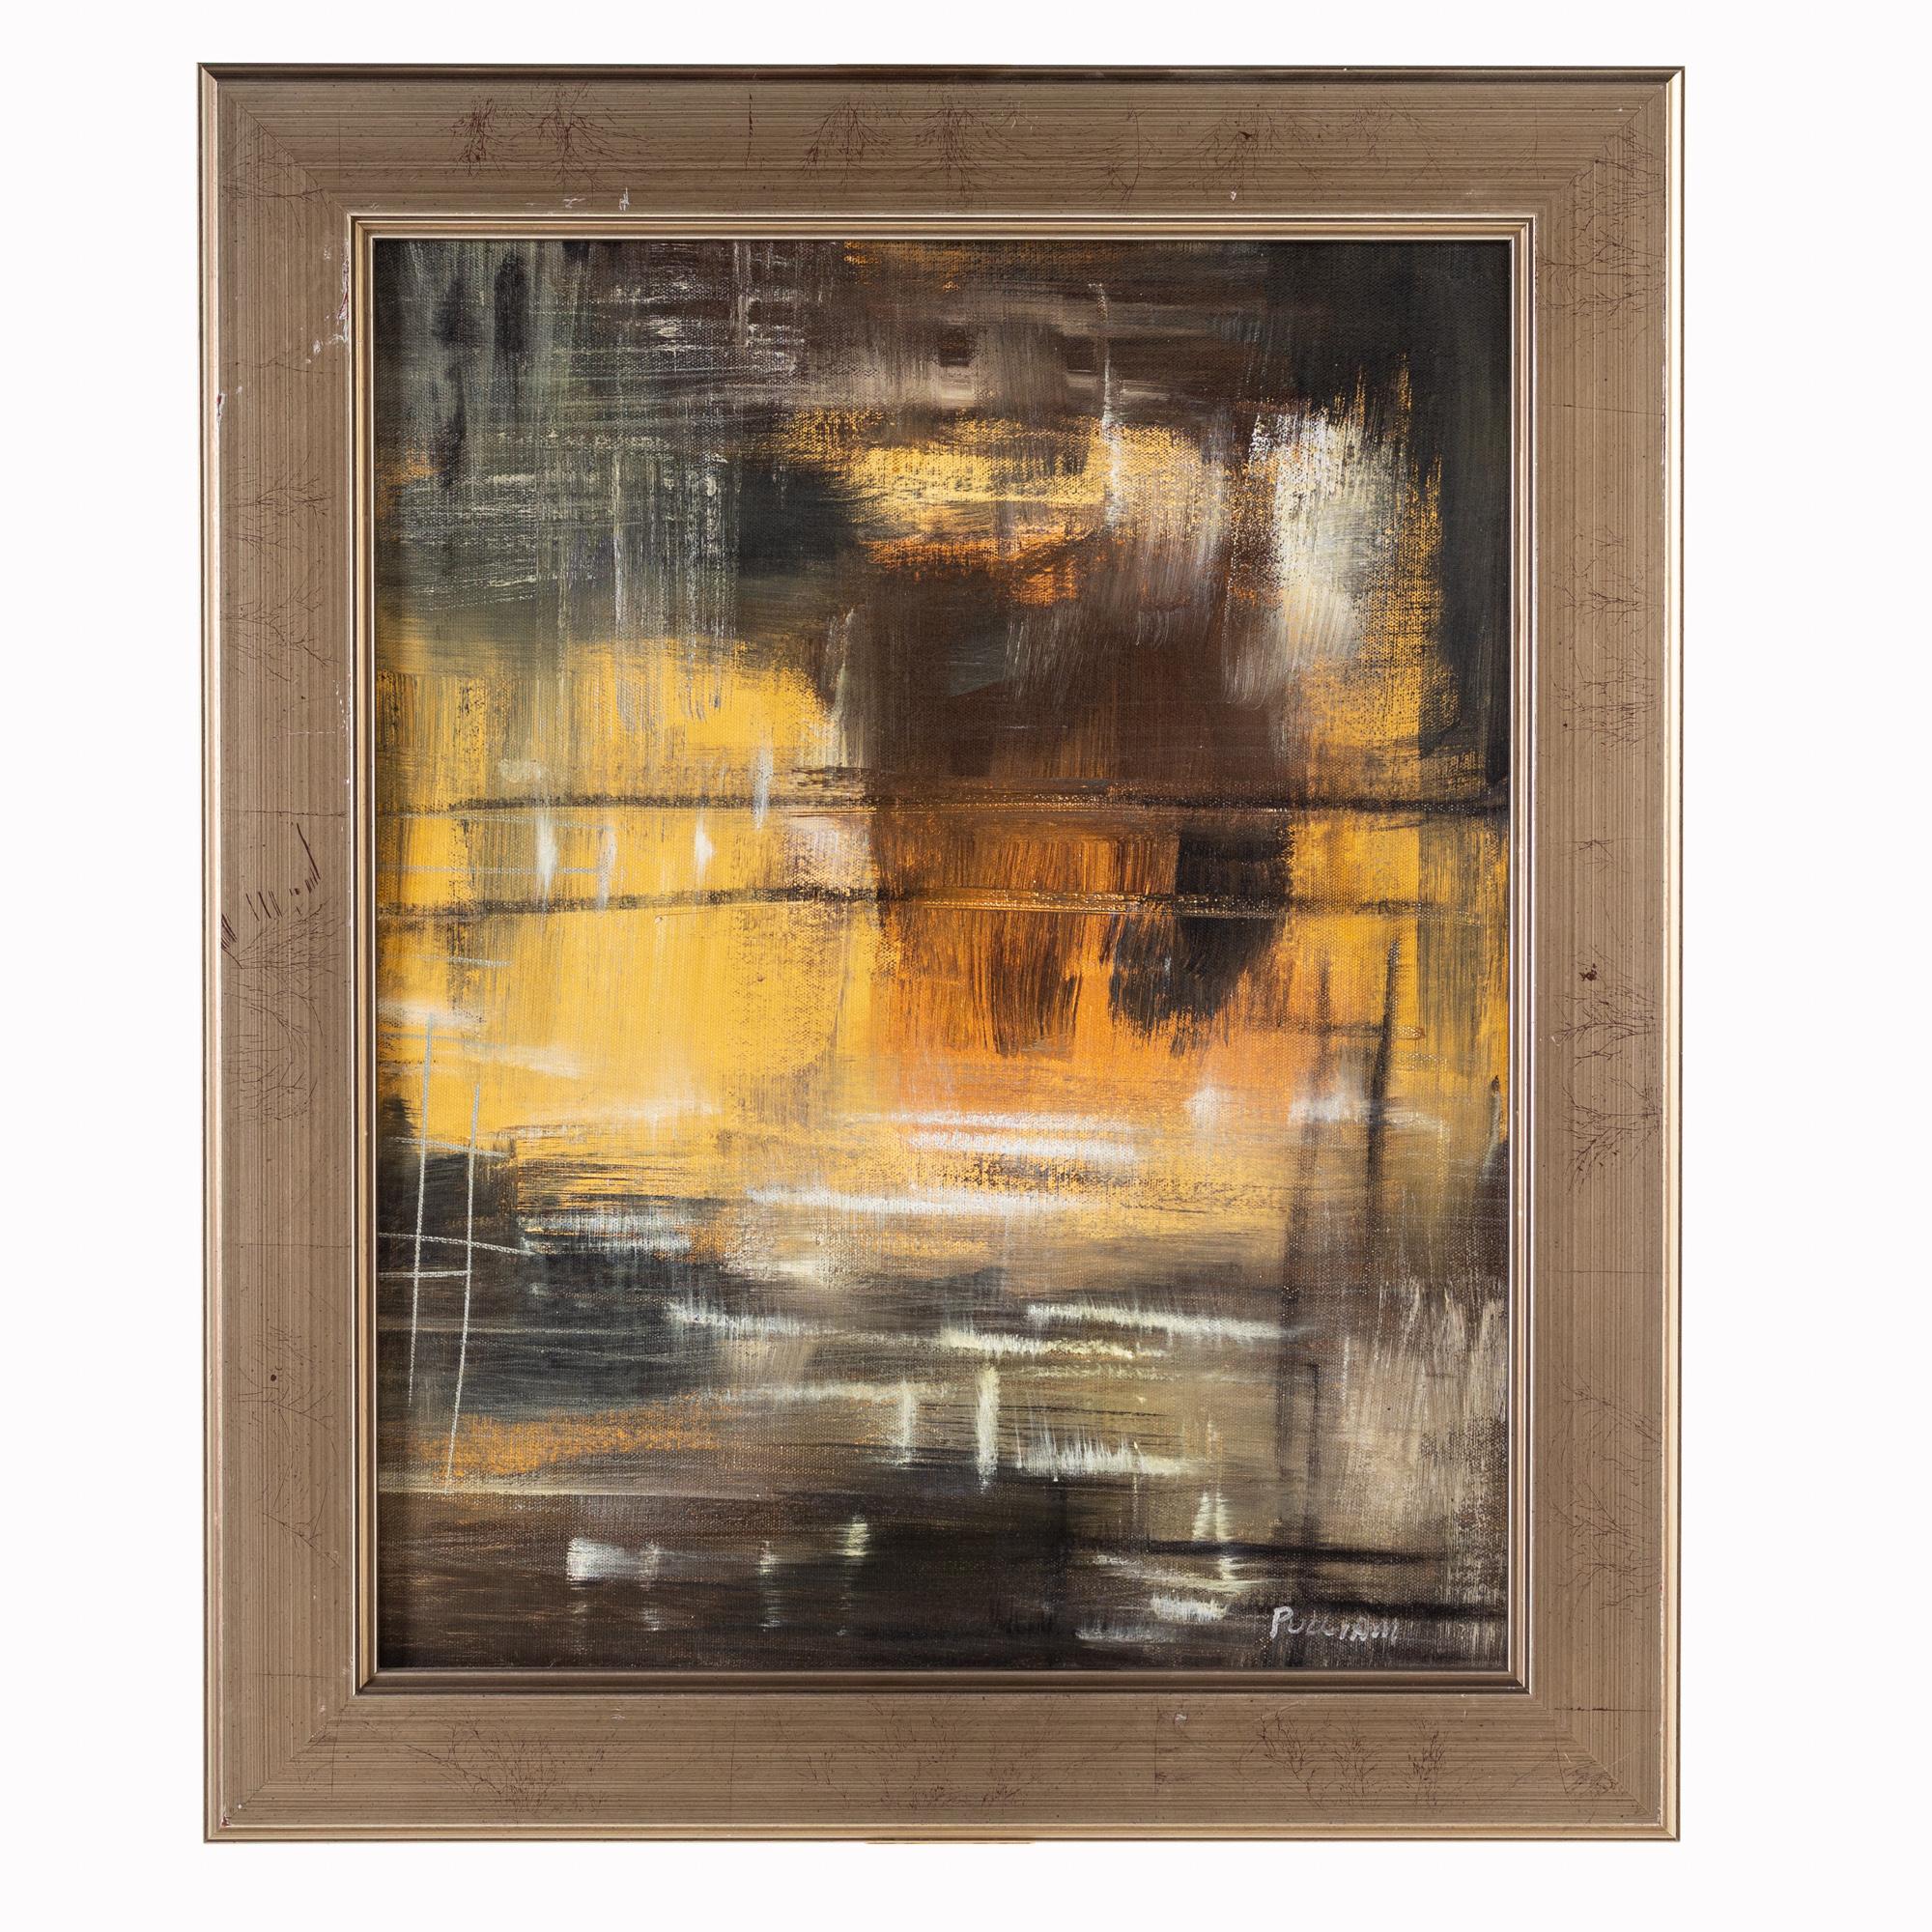 Pulliam Abstract framed oil painting on canvas

This painting measures: 20 wide x 2 deep x 24 inches high

This painting is in great Vintage condition with minor marks, dents, and wear.

We take our photos in a controlled lighting studio to